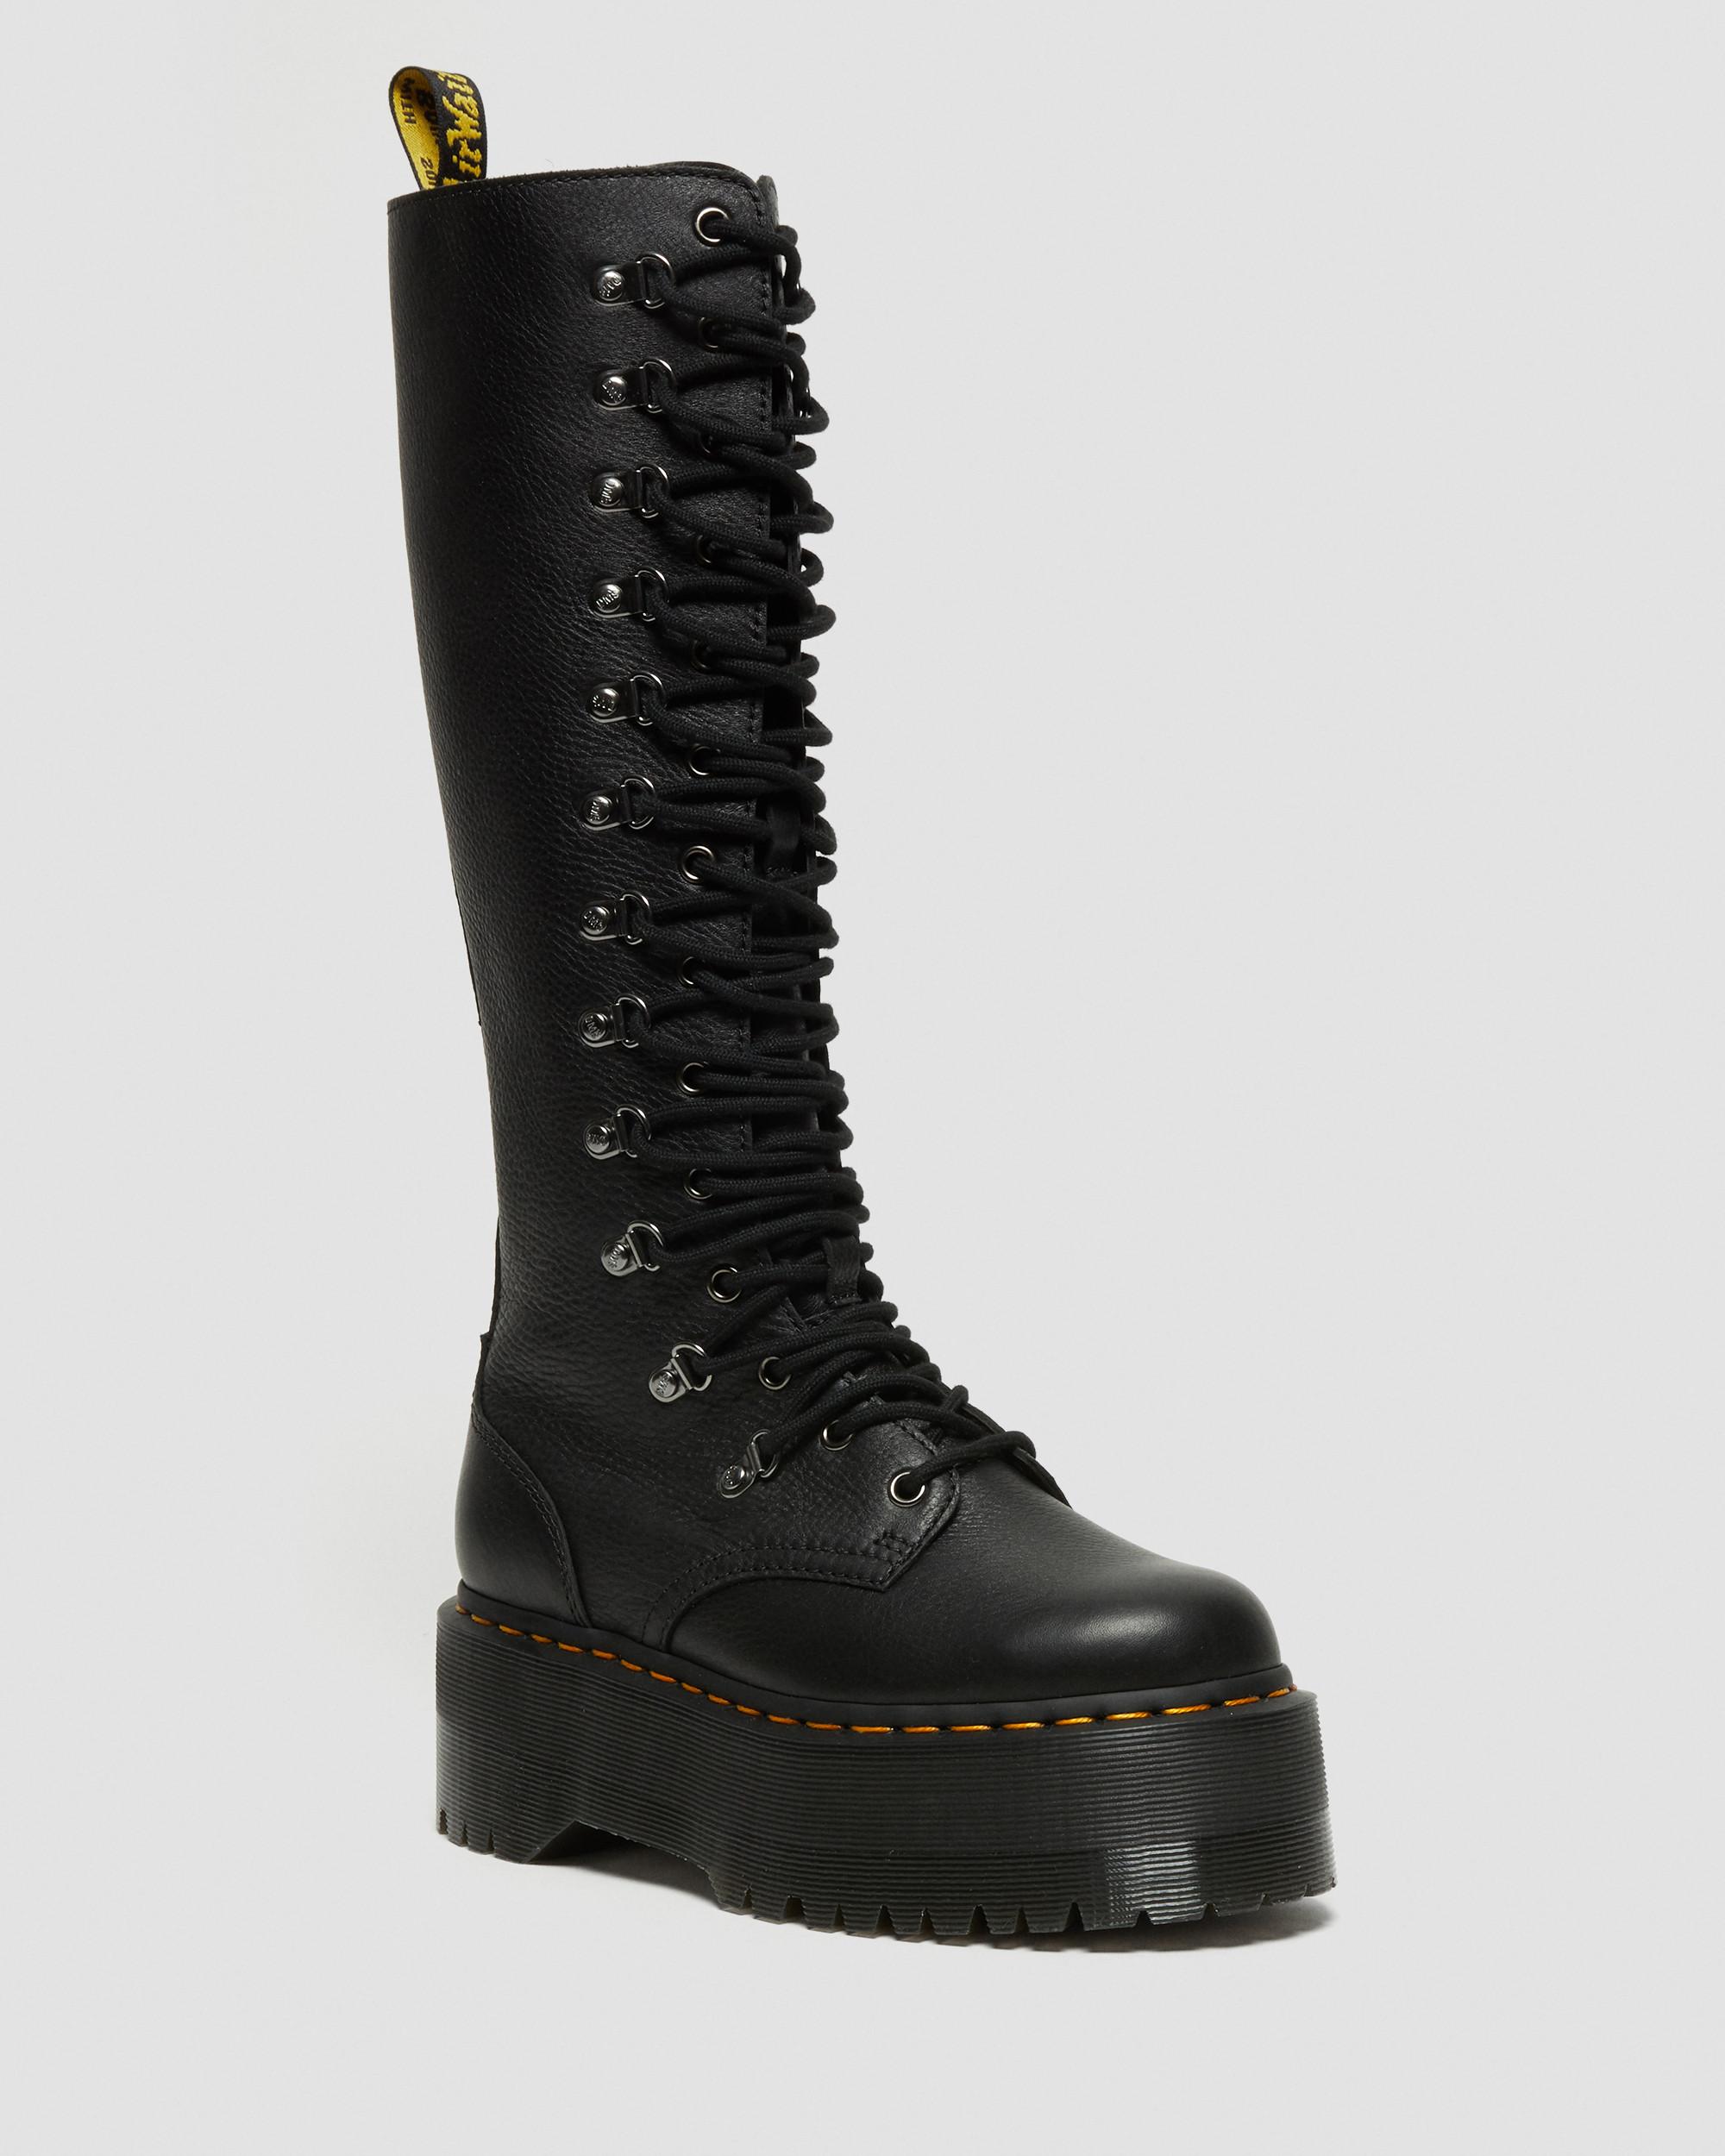 1B60 Max Hardware Leather Extra High Boots | Dr. Martens